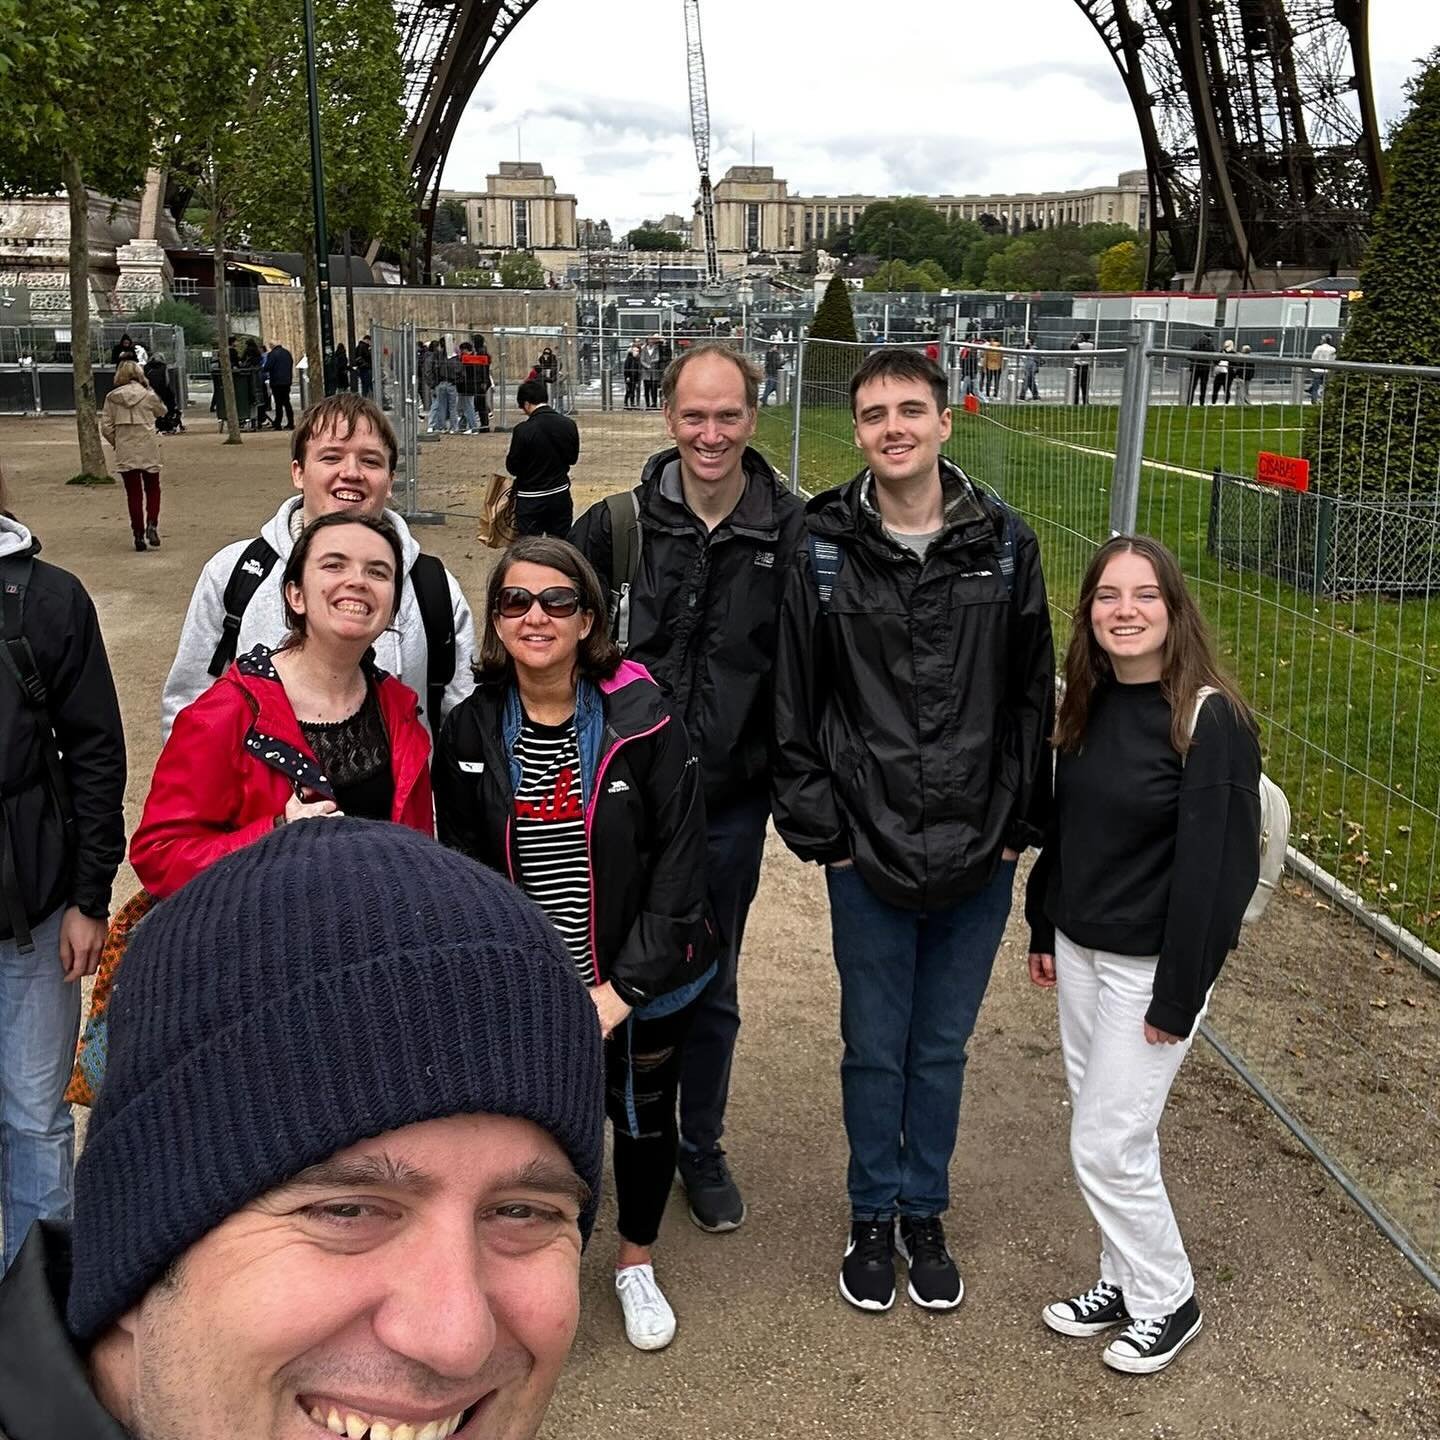 Looks like our young adults had a great time in Paris! Community, serving &amp; exploring together. 🇫🇷